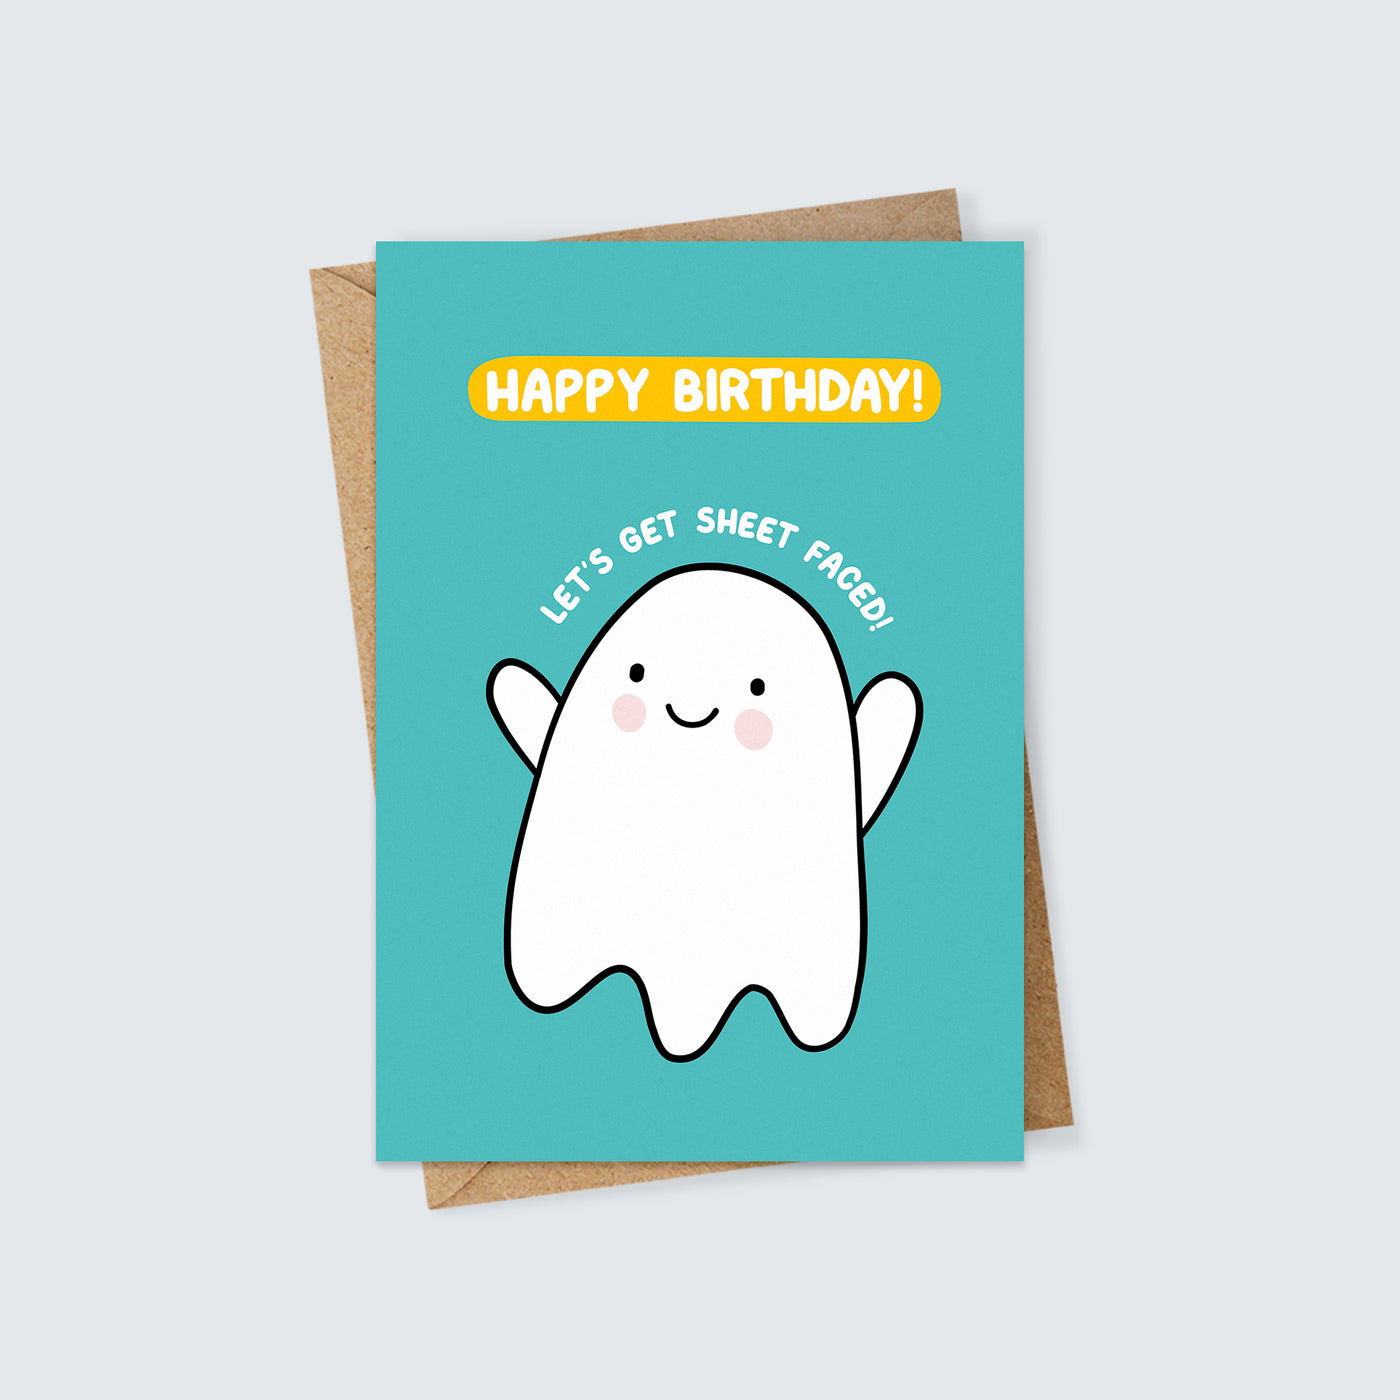 Let's Get Sheet Faced Cute Ghost Card